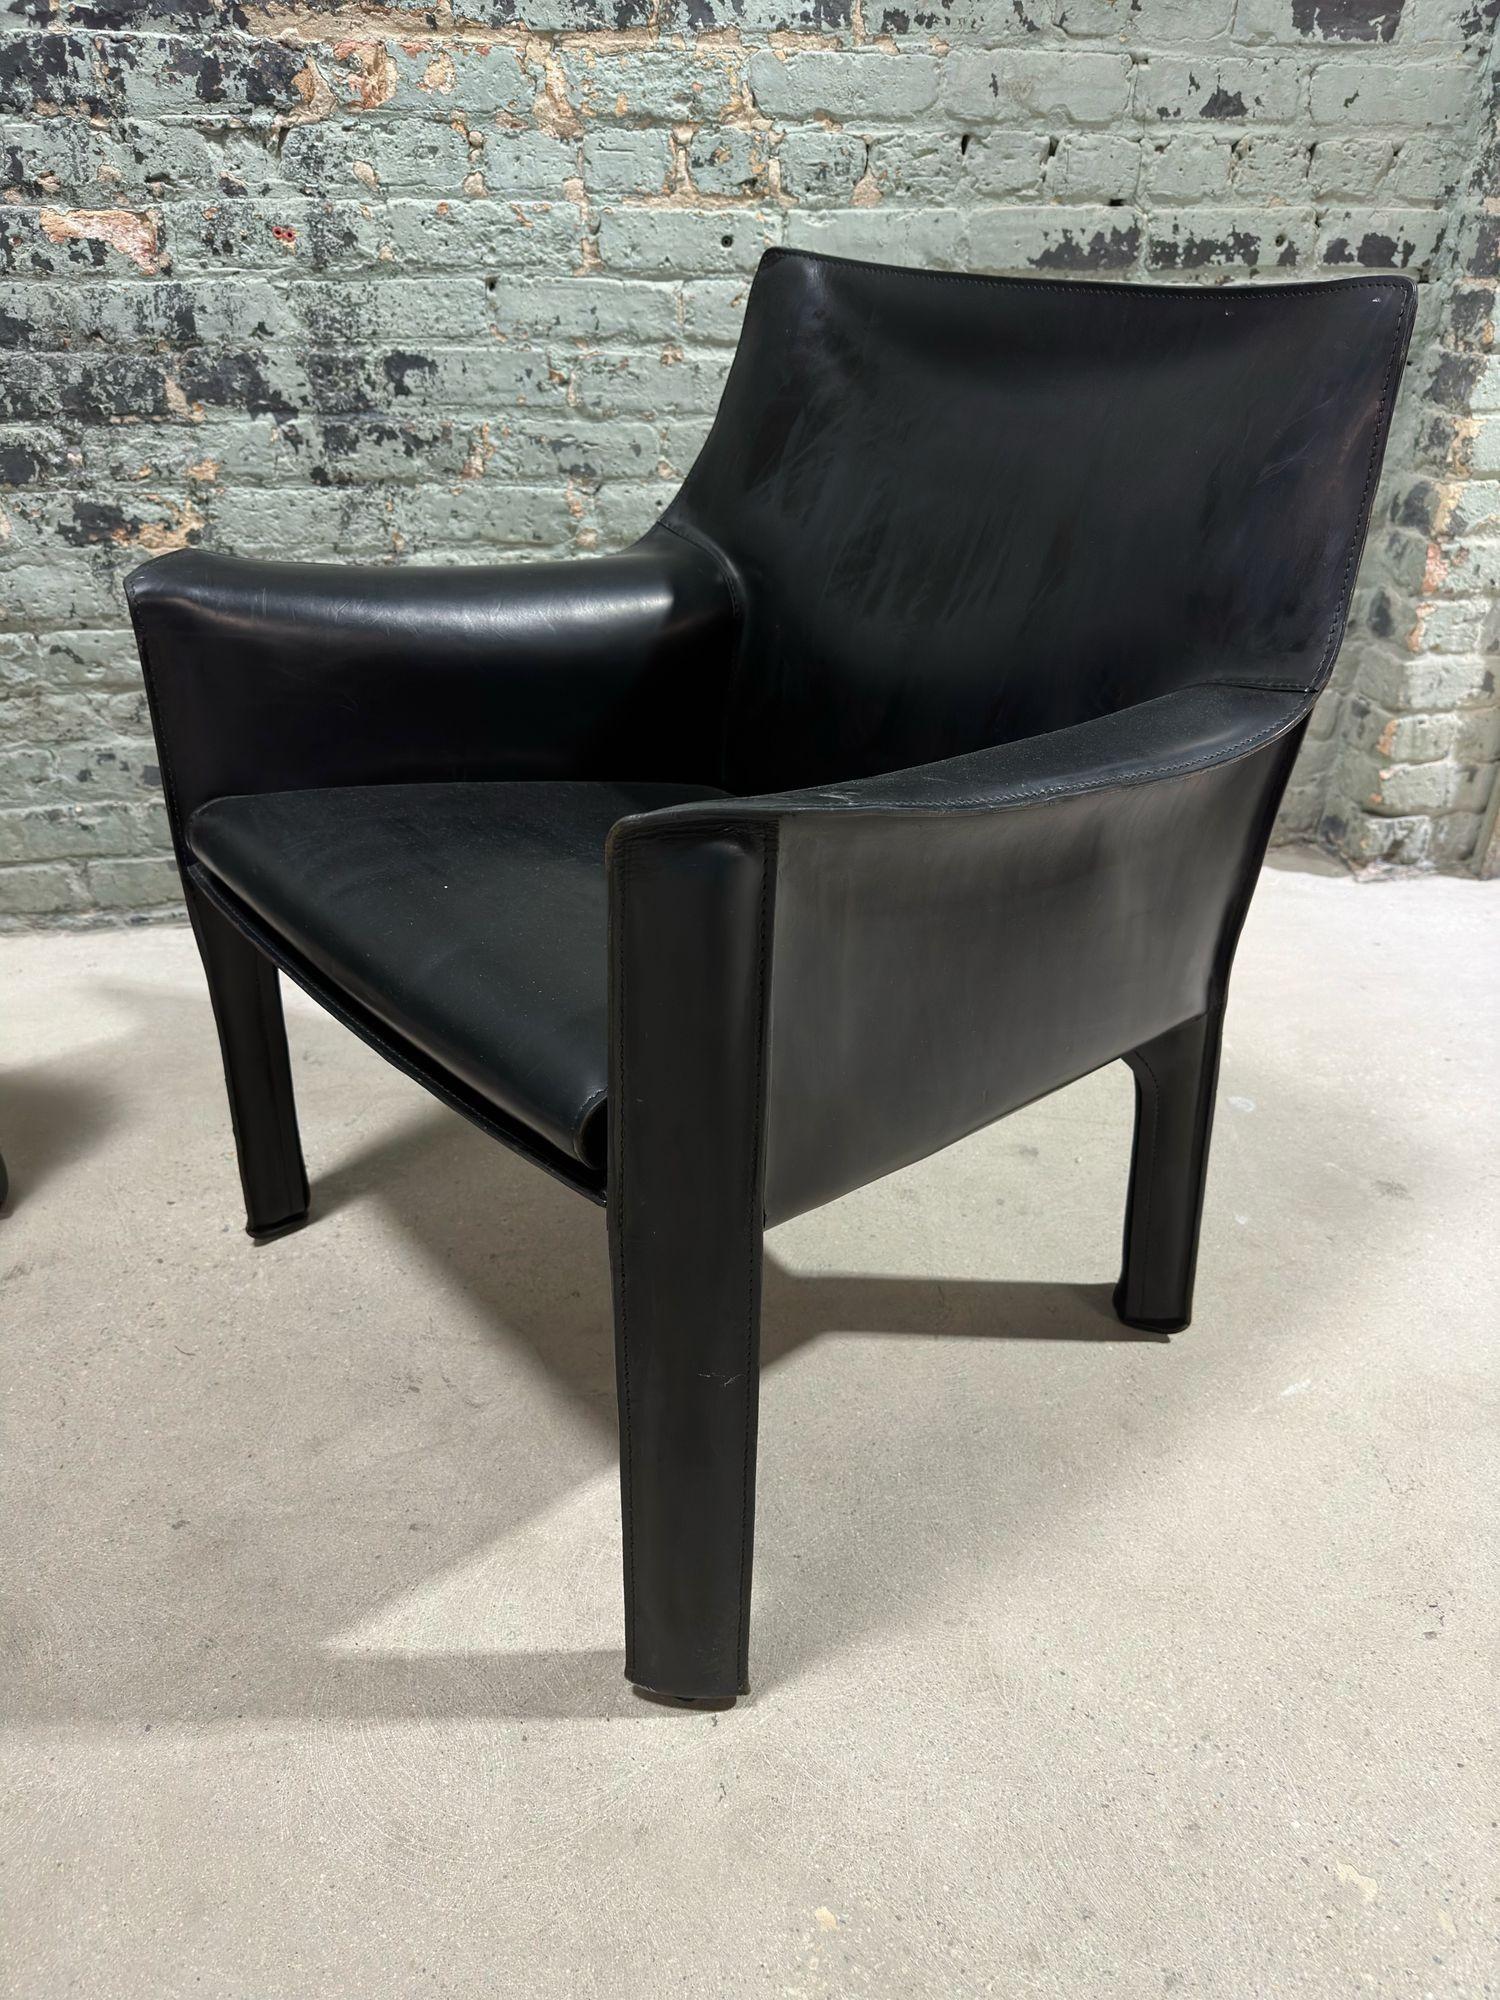 Late 20th Century Pair Mario Bellini Black Leather Cab Chairs, Model 414 for Cassina Italy, 1980 For Sale